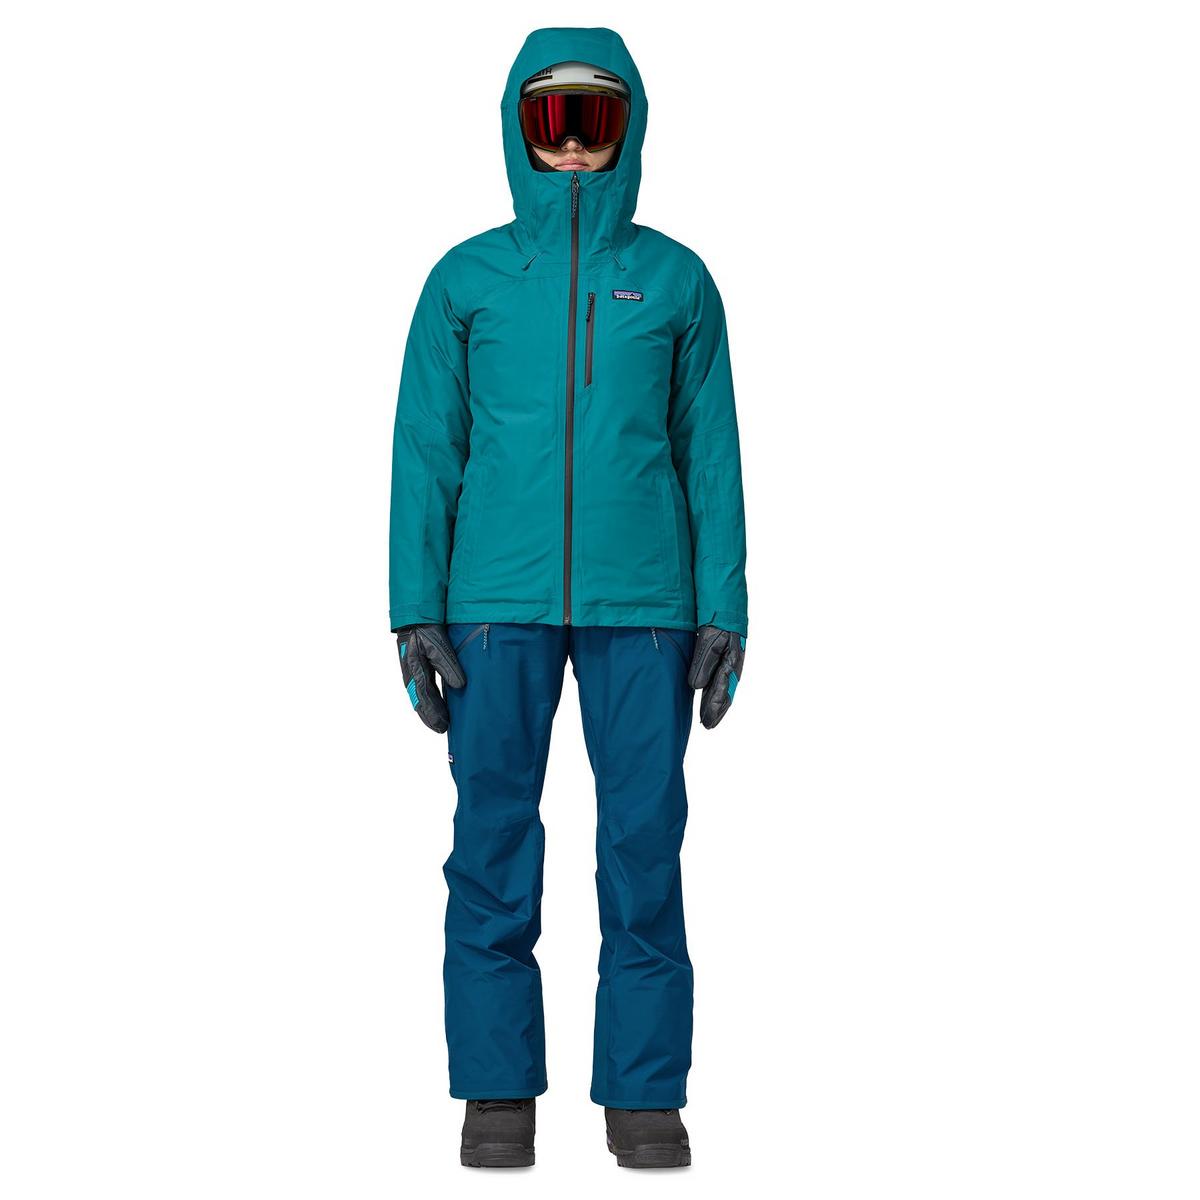 Patagonia Women's Insulated Powder Town Jacket - Blue